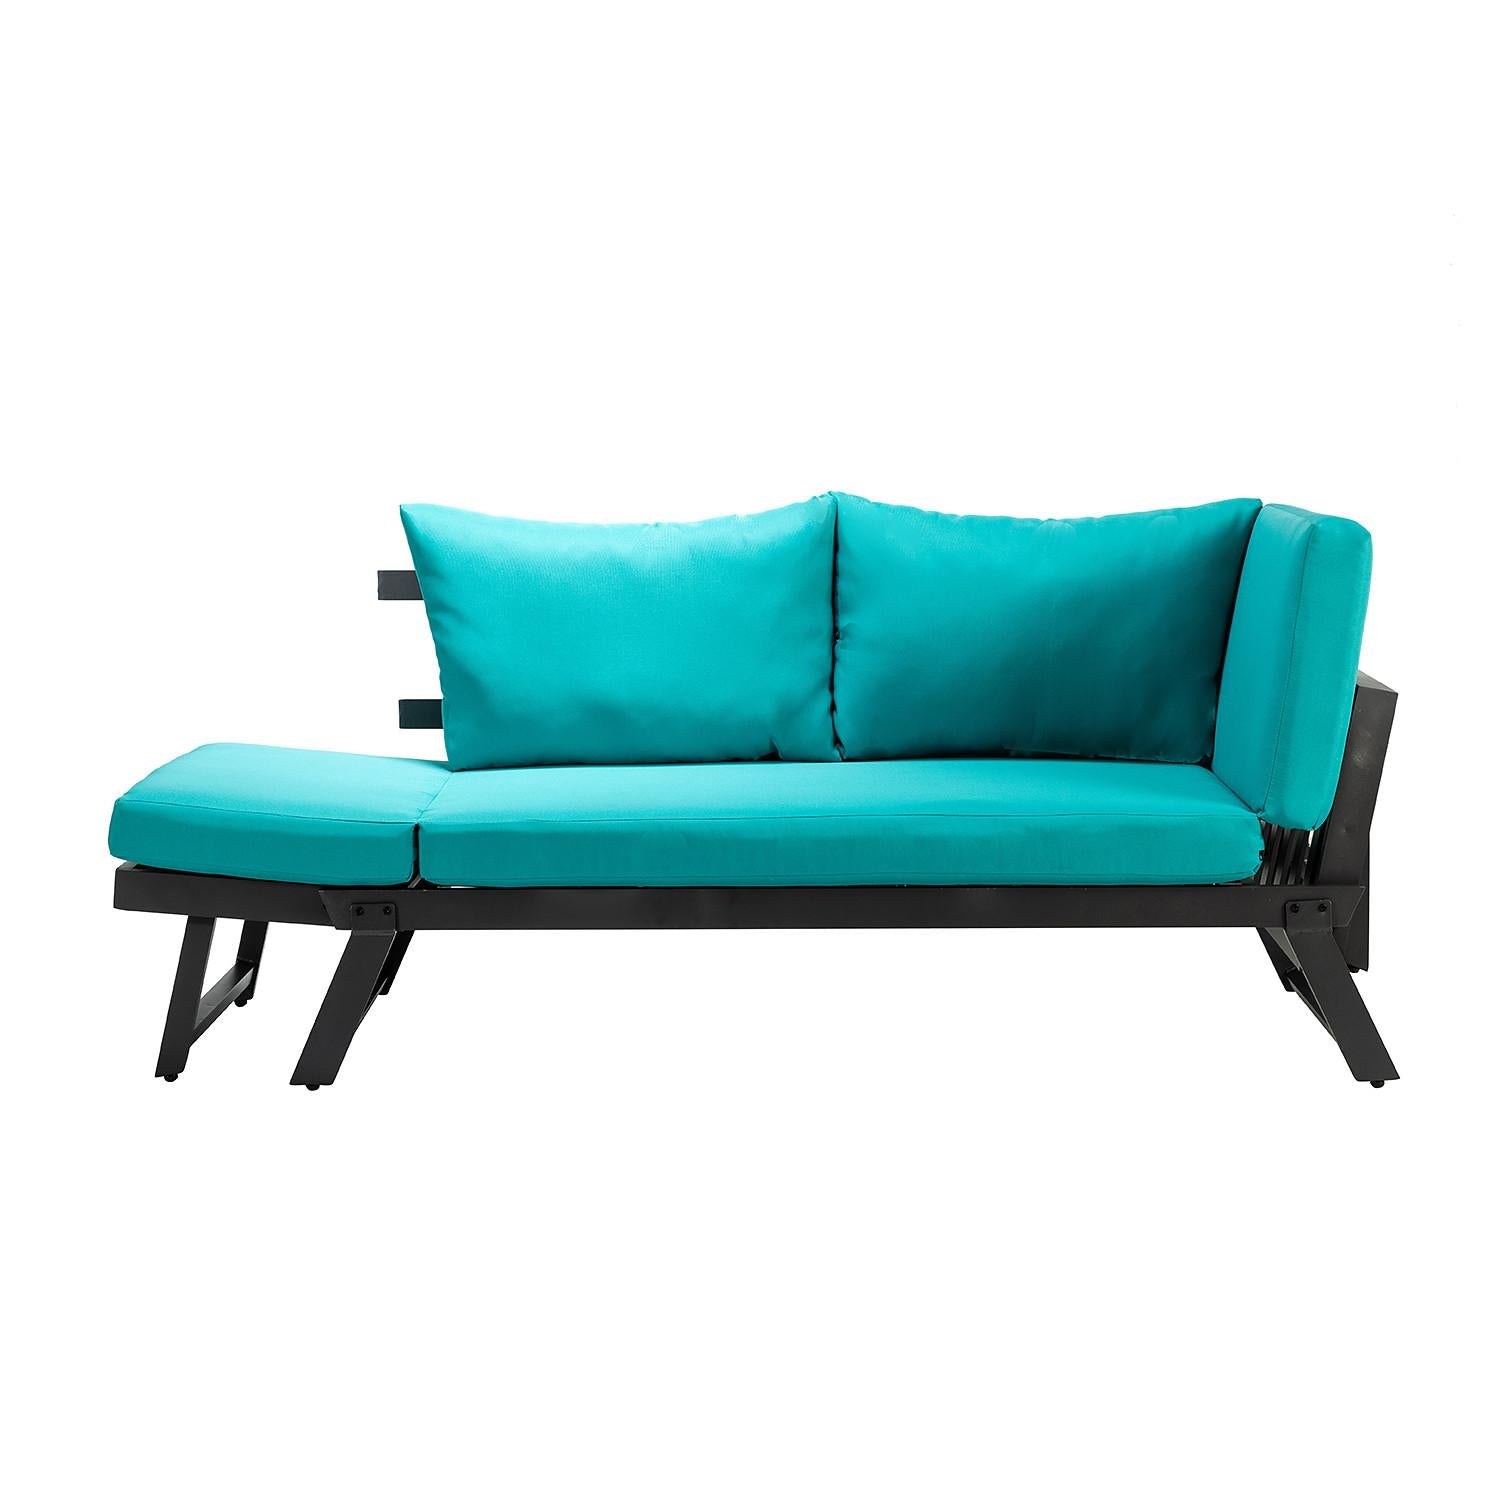 Teal Outdoor Patio Convertible Modern Daybed